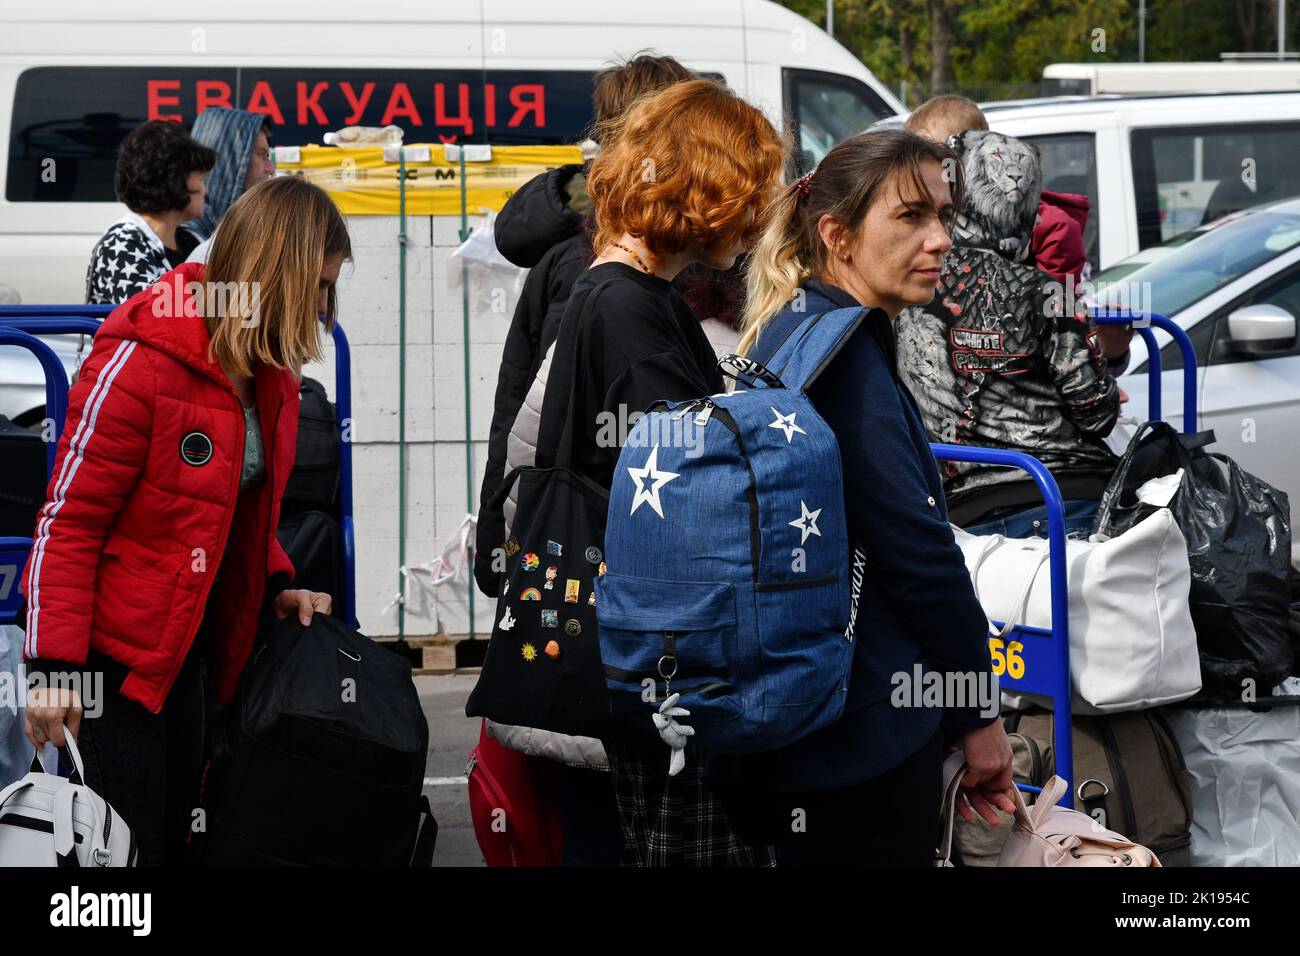 Refugees from south Ukraine are seen during the evacuation of civilians at a refugee centre in Zaporizhzhia. The war in Ukraine has driven millions of Ukrainians, particularly women and children, from their homes, with many fleeing to neighbouring European countries for refuge. As the war continues to rage, buildings crumble alongside dreams, agricultural fields become dotted with landmines and basic needs such as water are a growing concern for those who have remained. (Photo by Andriy Andriyenko / SOPA Images/Sipa USA) Stock Photo